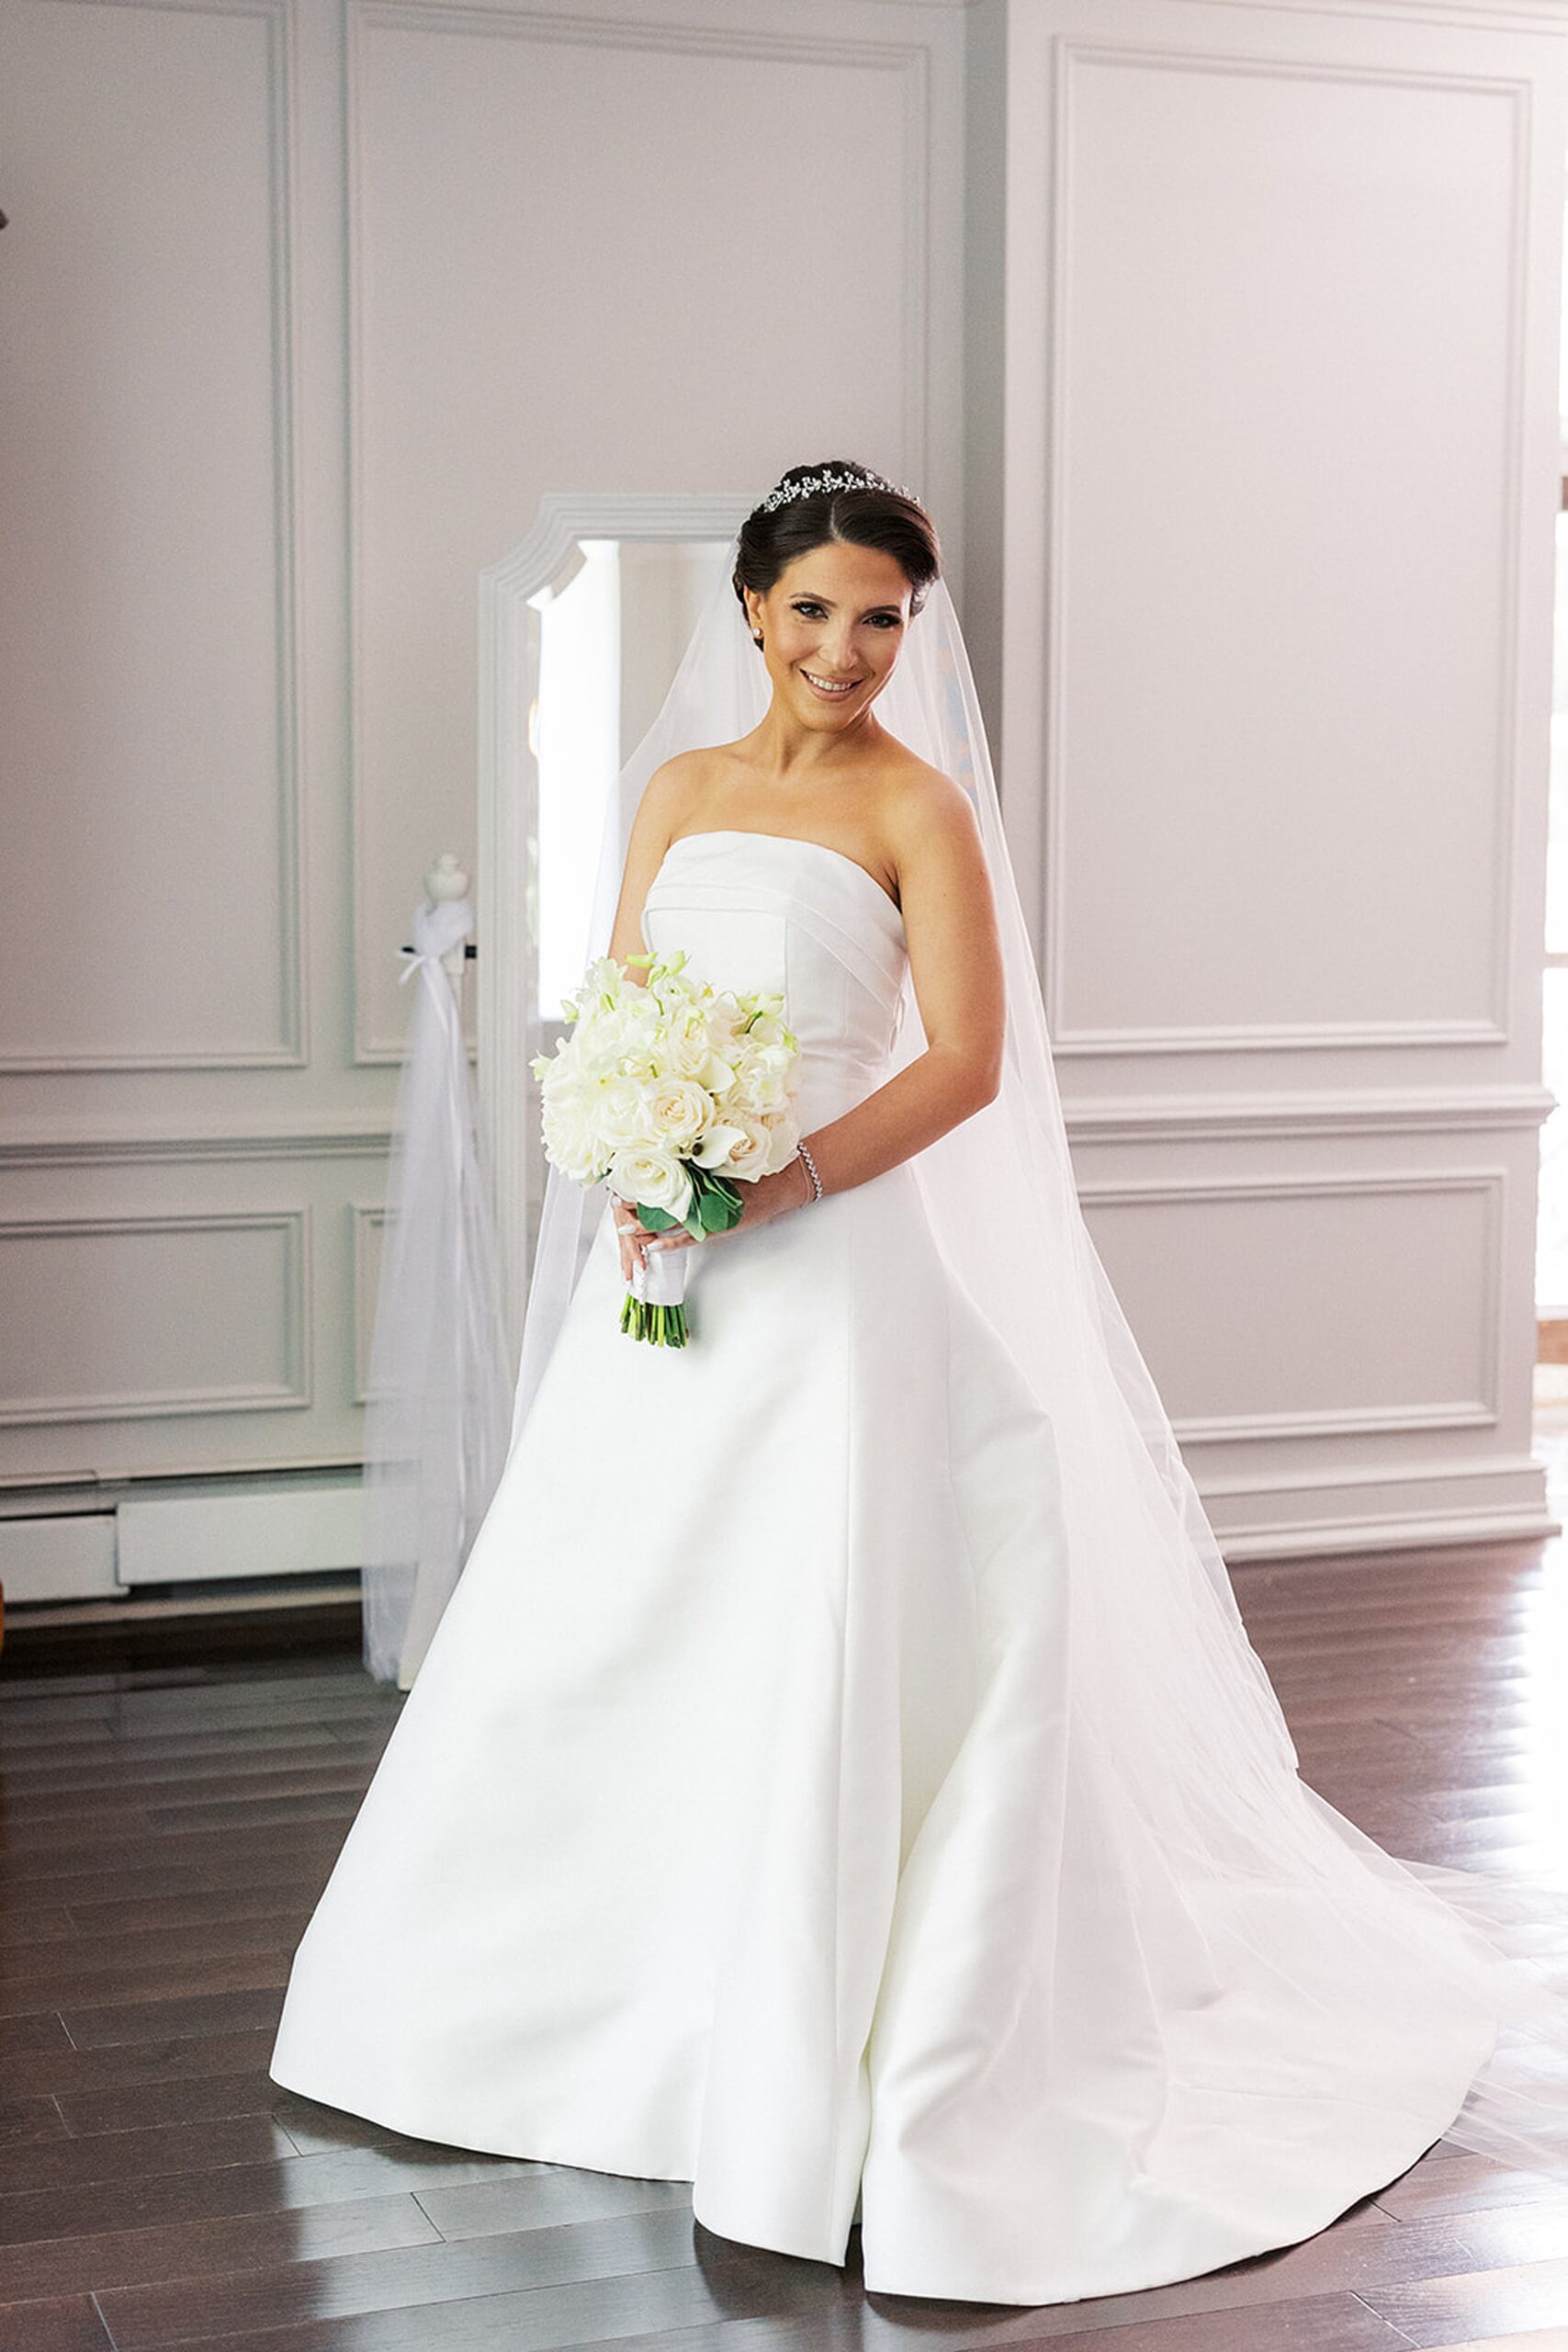 A bride stands in her dress in front of a mirror holding her white rose bouquet